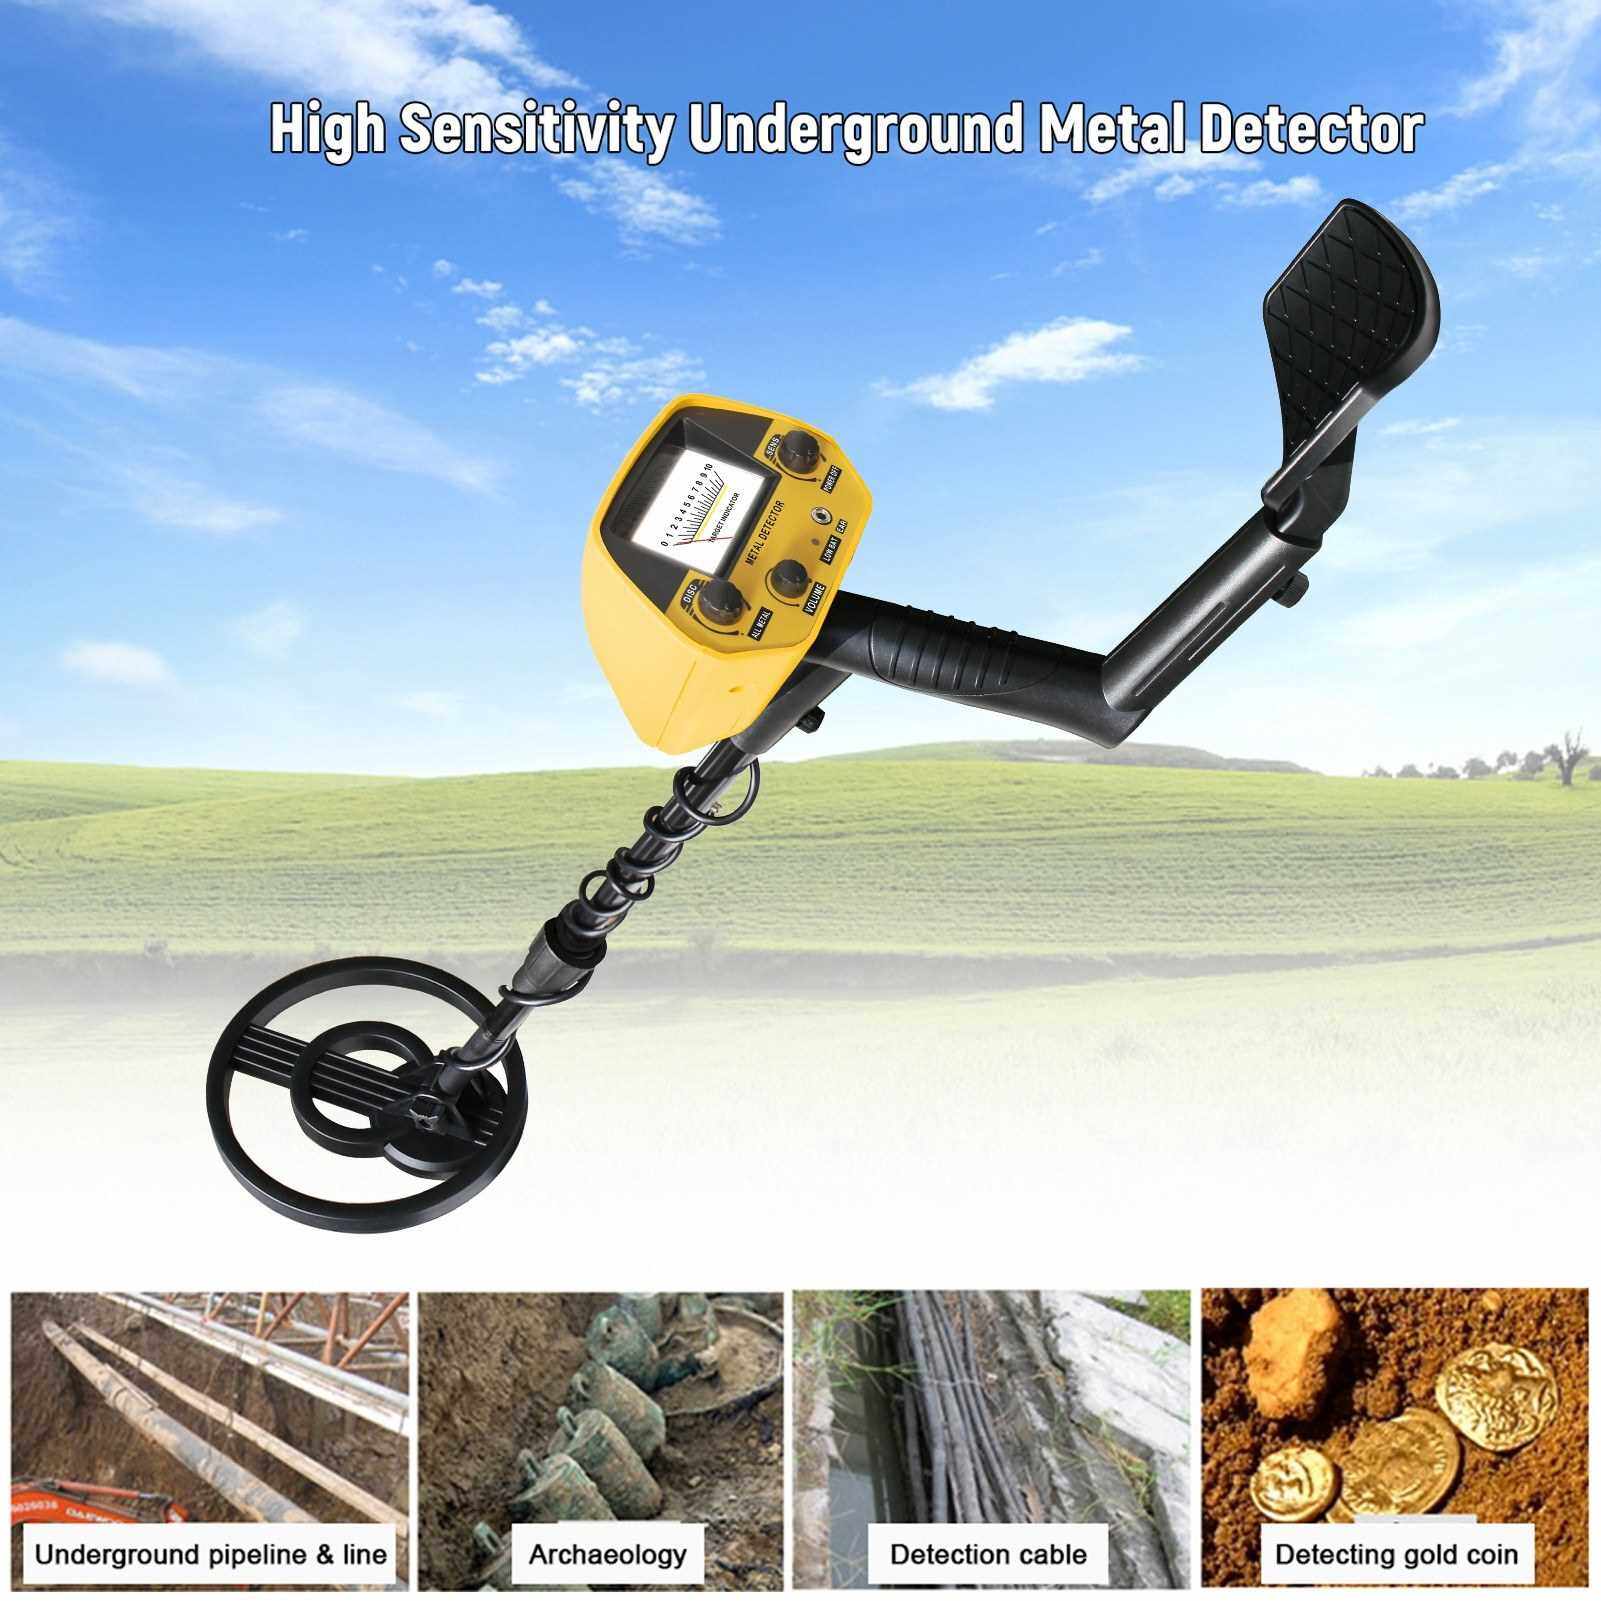 Metal Detector High Accuracy Adjustable Stem 7 Inch Waterproof Coil All Metal & Disc Modes for Underground Coins Relics Jewelry Beach Treasures (2)